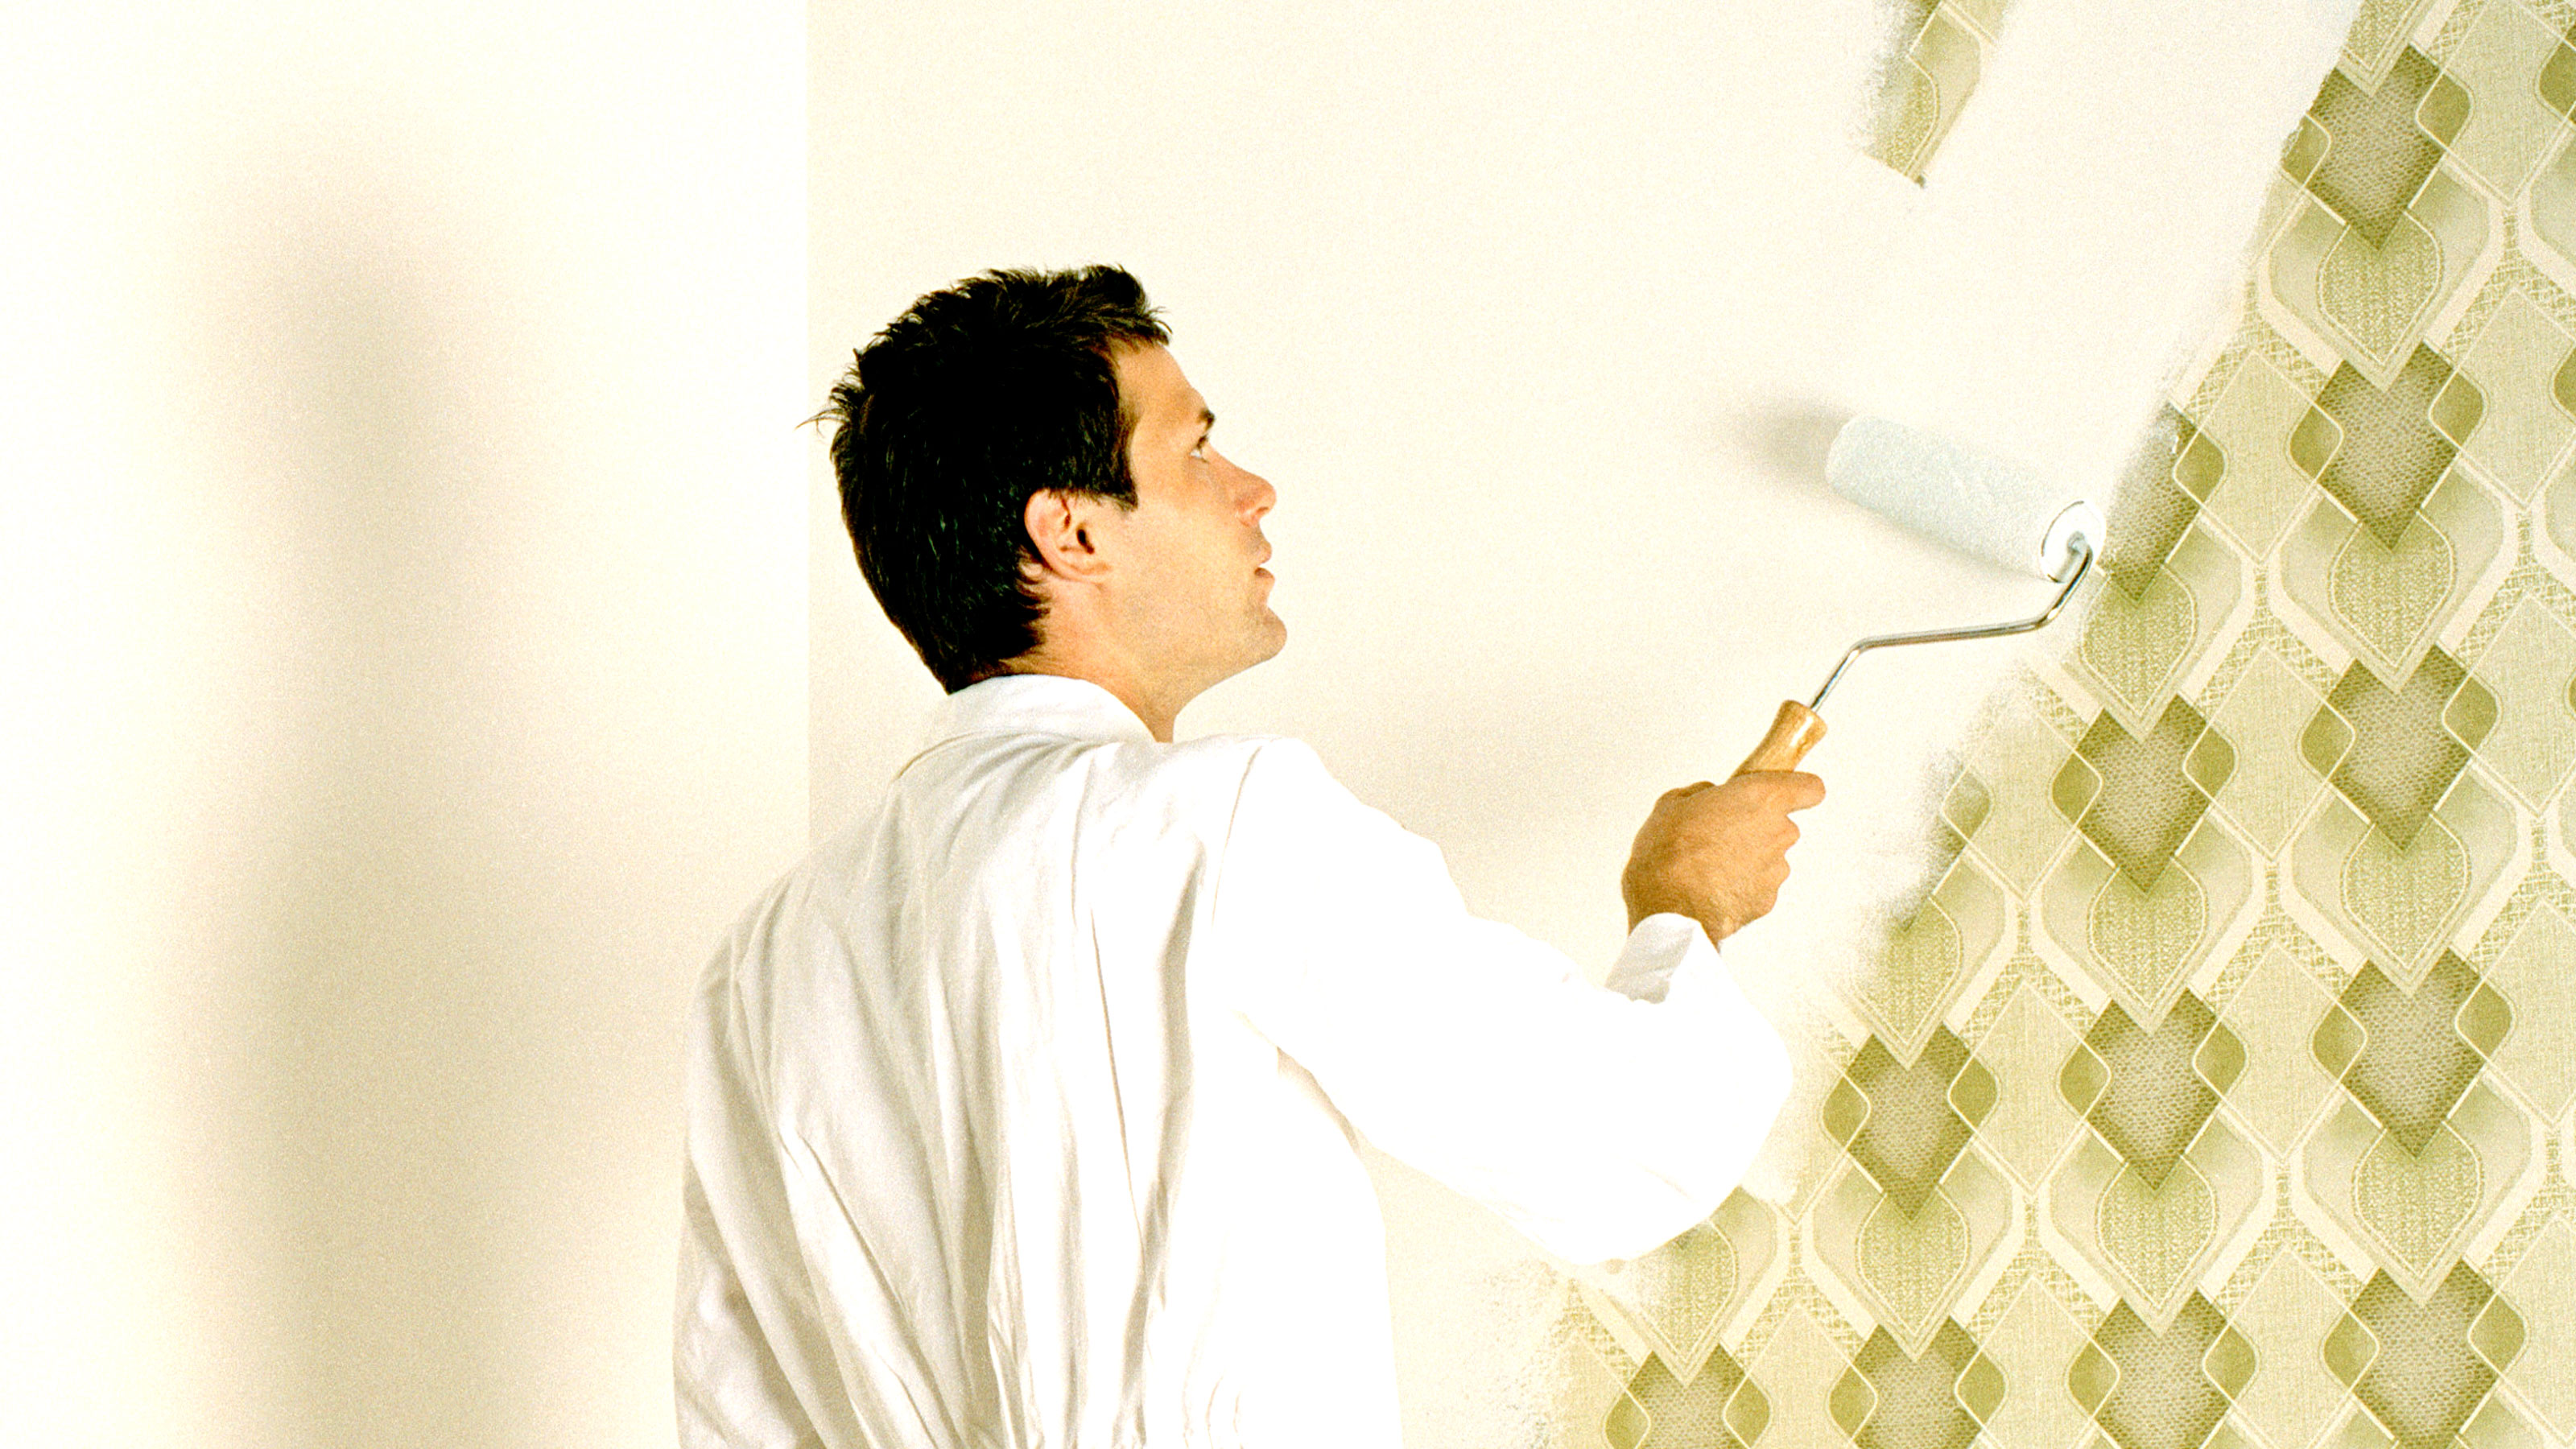 Painting over textured wallpaper: pro tips and techniques | Homebuilding